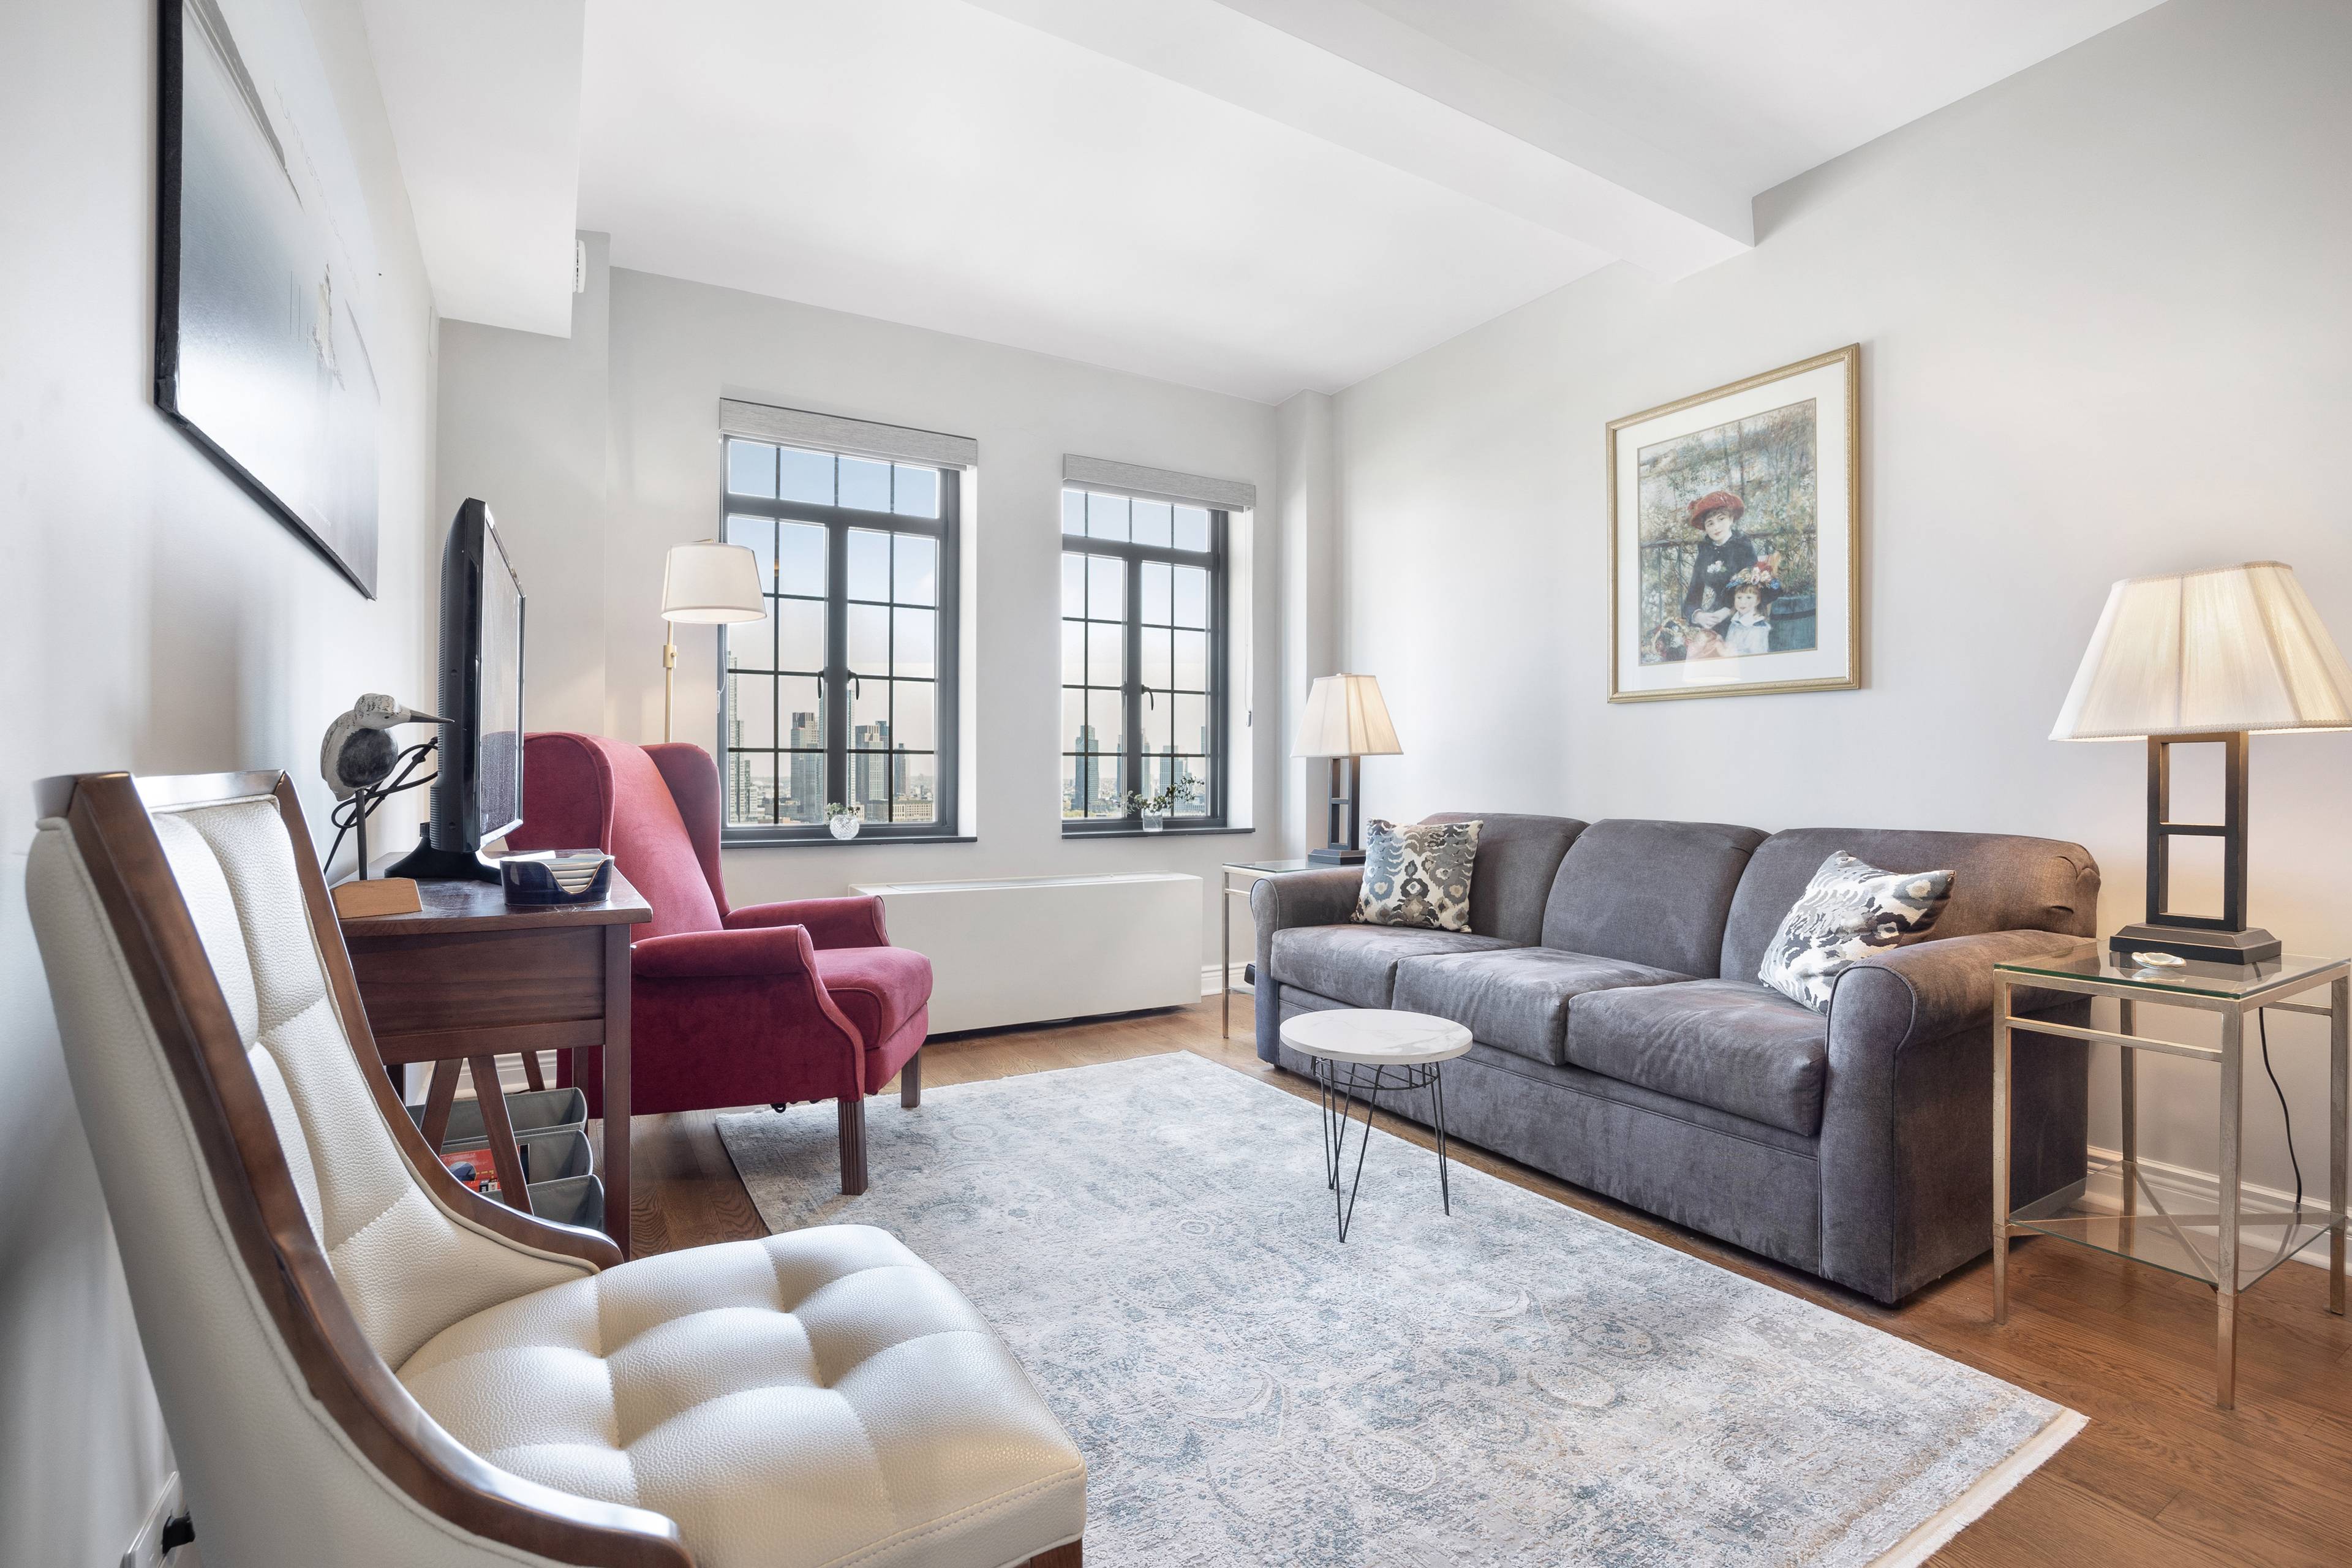 Introducing a truly exceptional find at 5 Tudor City Place apartment 1338.